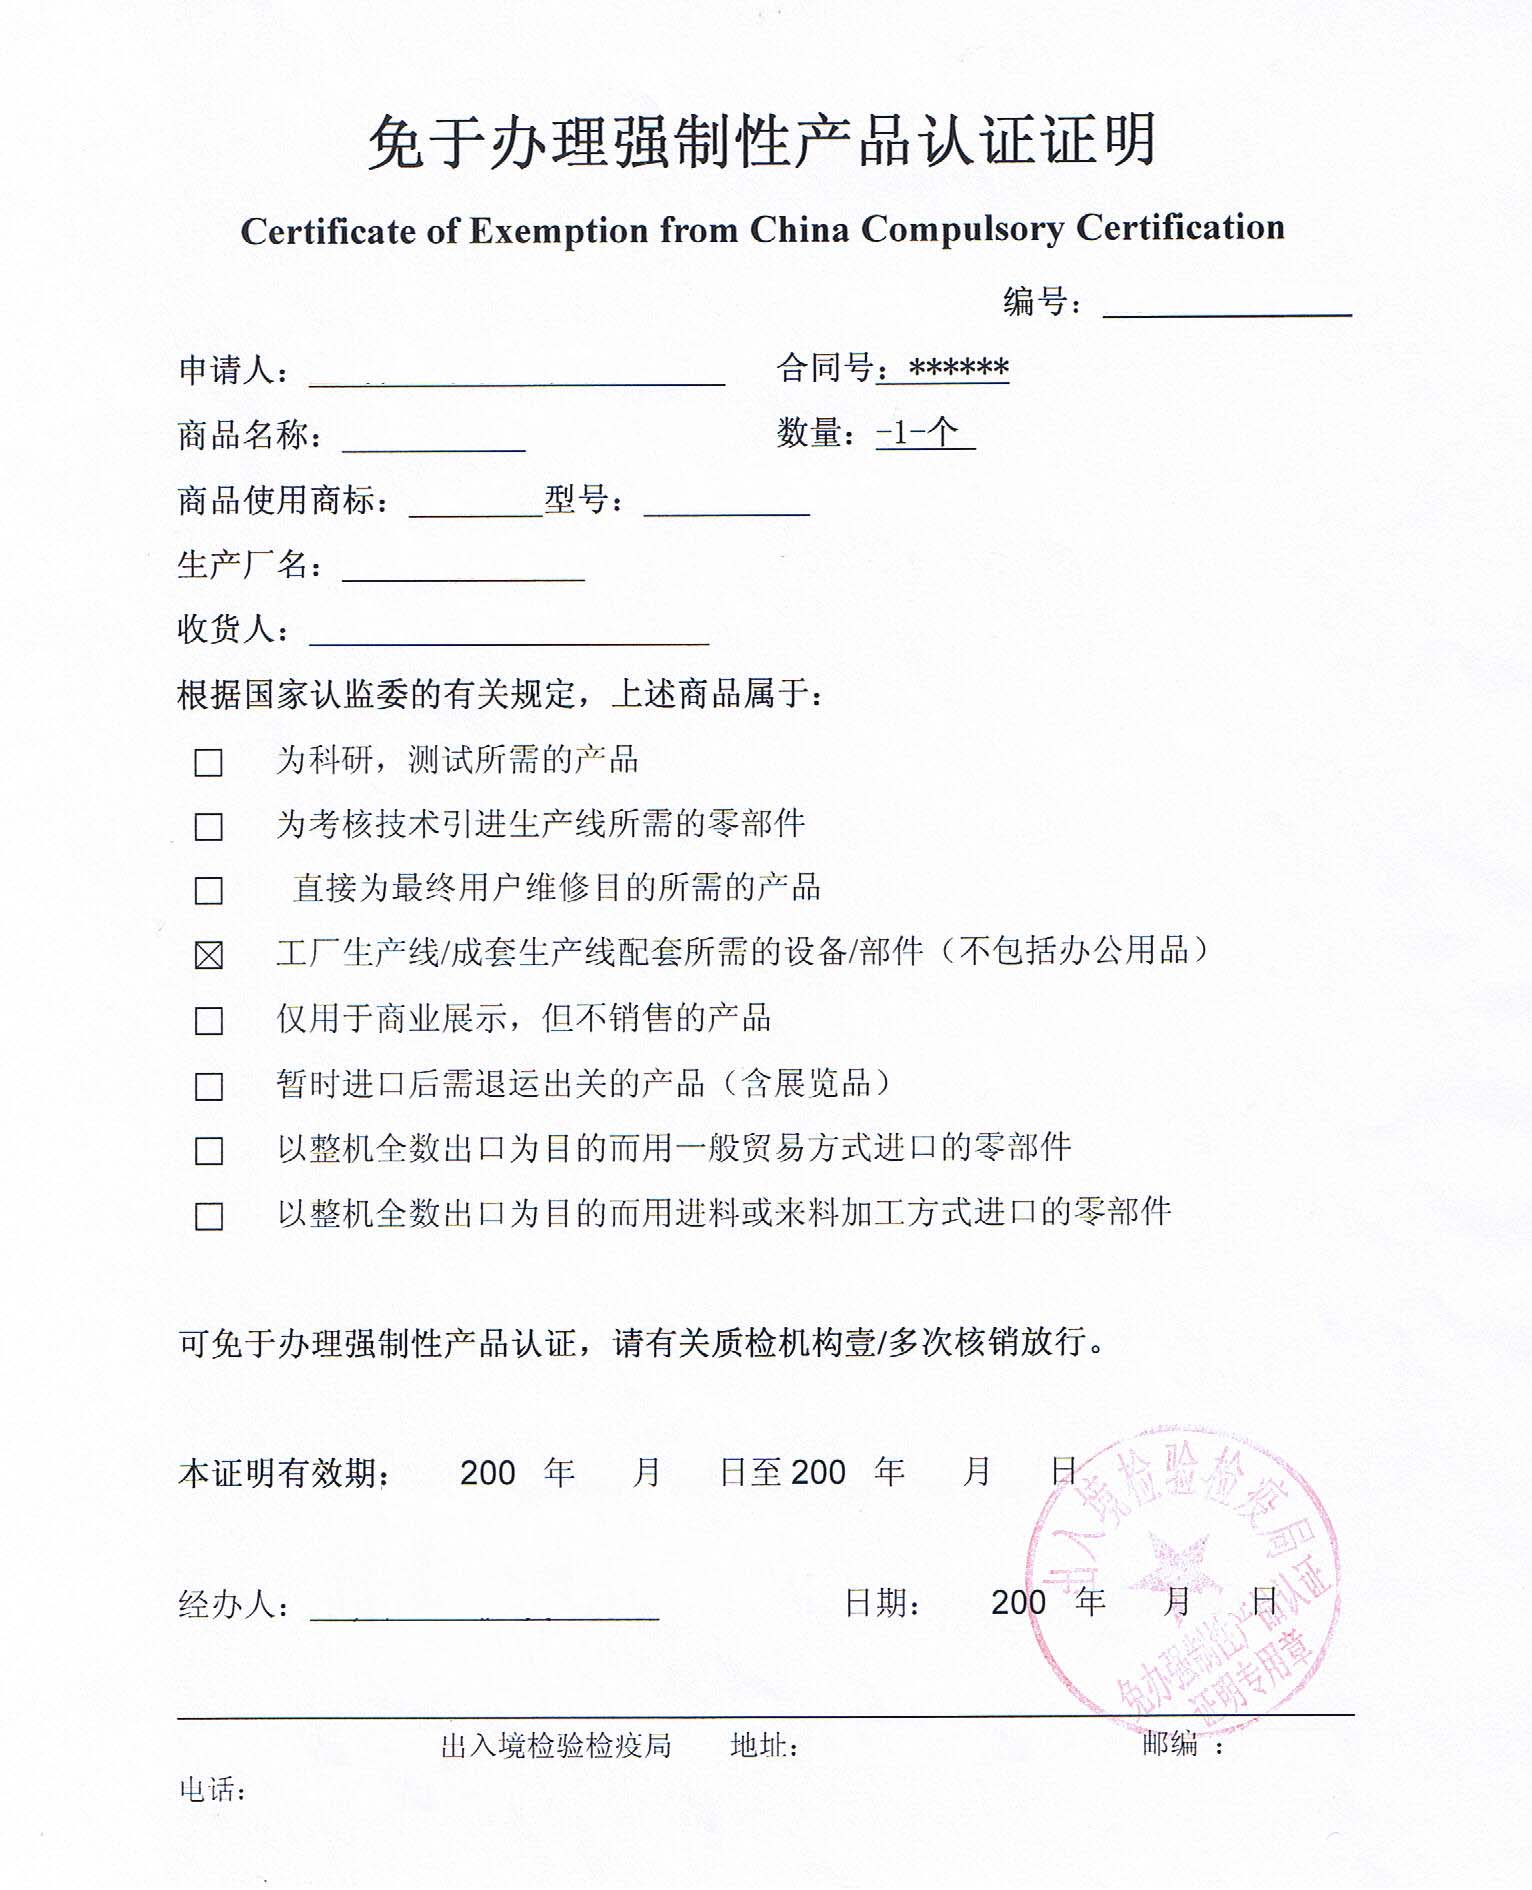 Certificate of Exemption from CCC